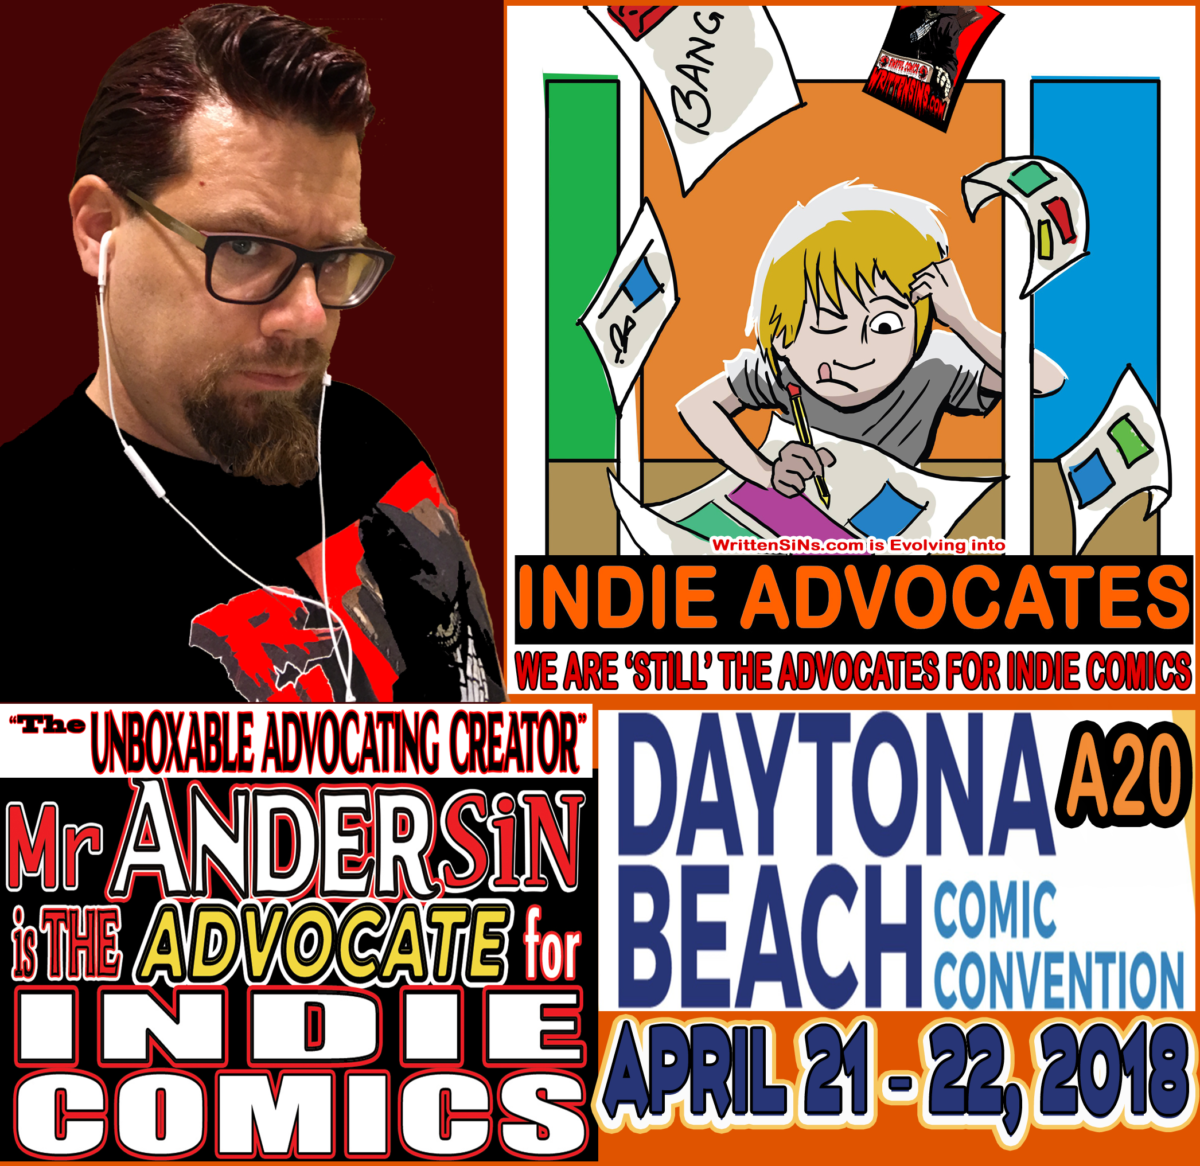 COMIC CON HIGHWAY EXITING with INDIE ADVOCATING  in FLORIDA::  Daytona Beach Comic Convention will have ADVOCATING and SiNs April 21 – 22, 2018  .